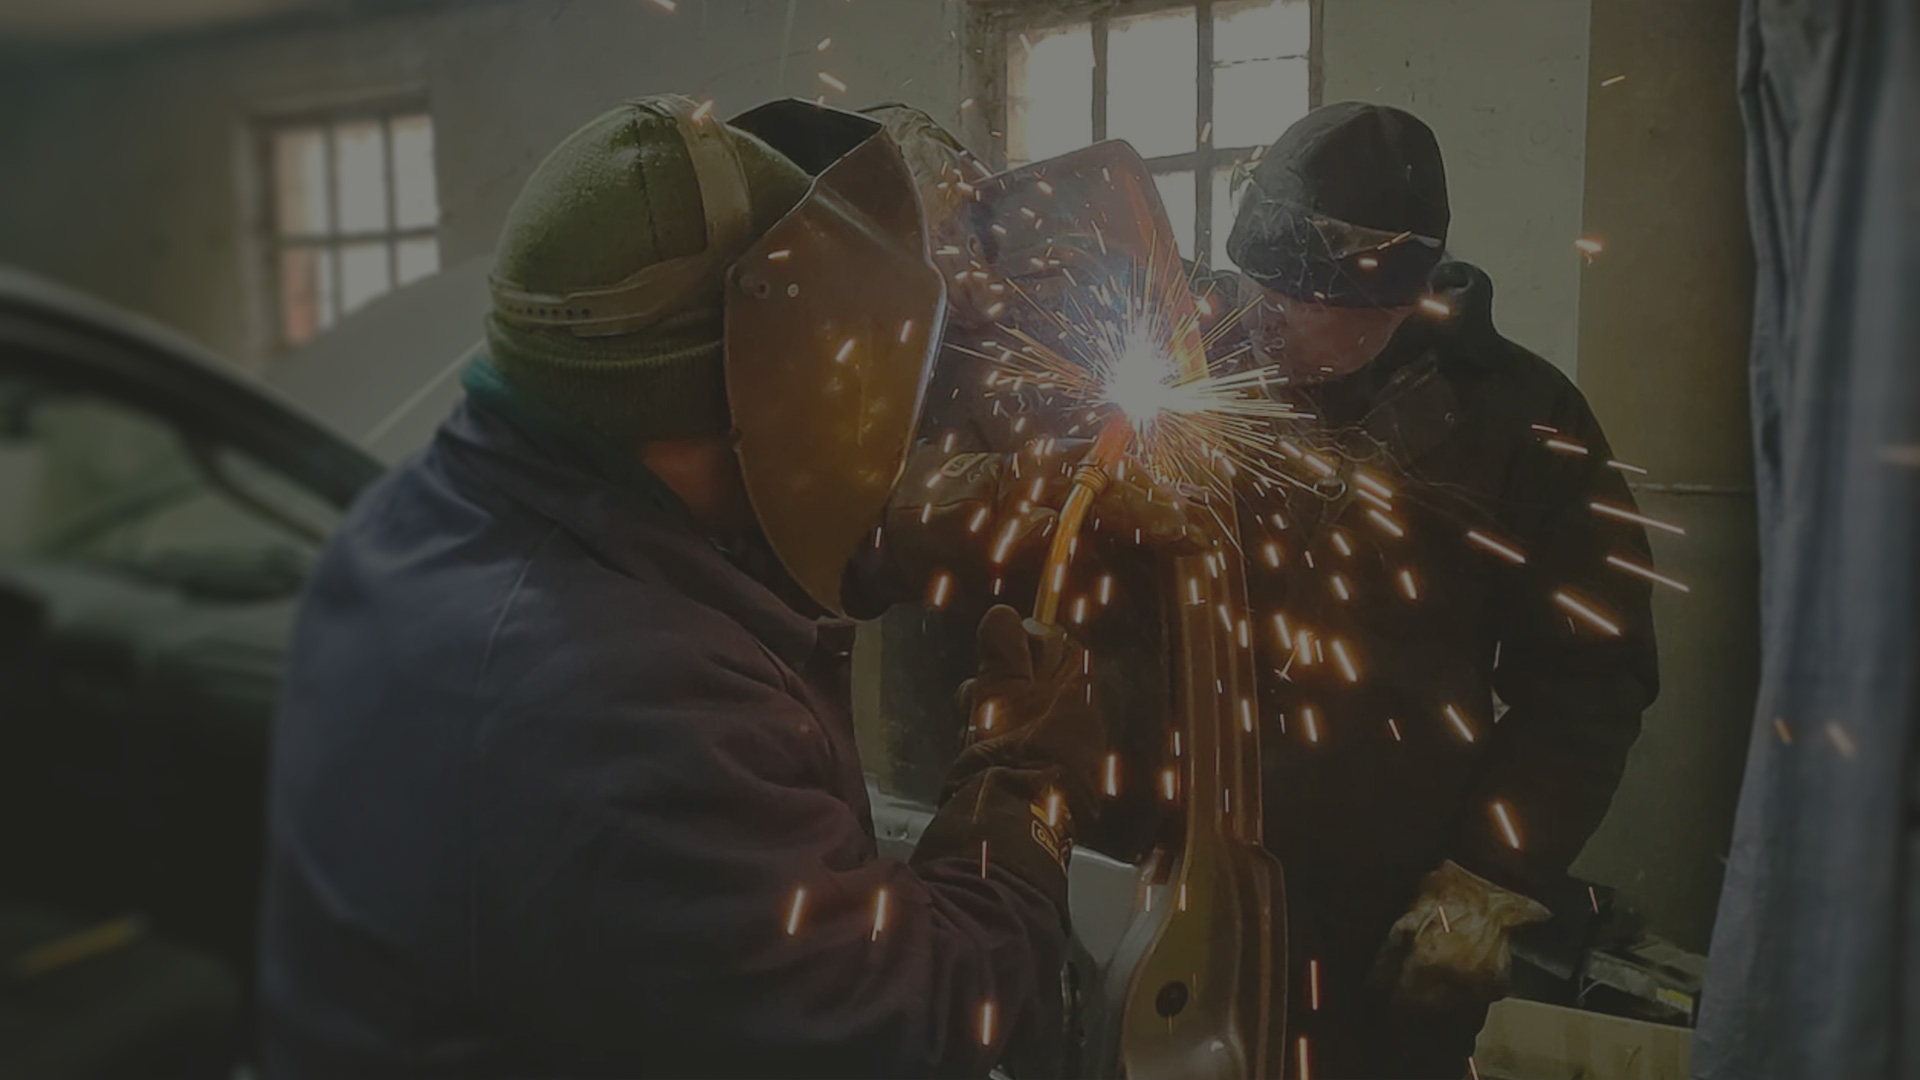 Two volunteers welding armor on the side door of a donated car.